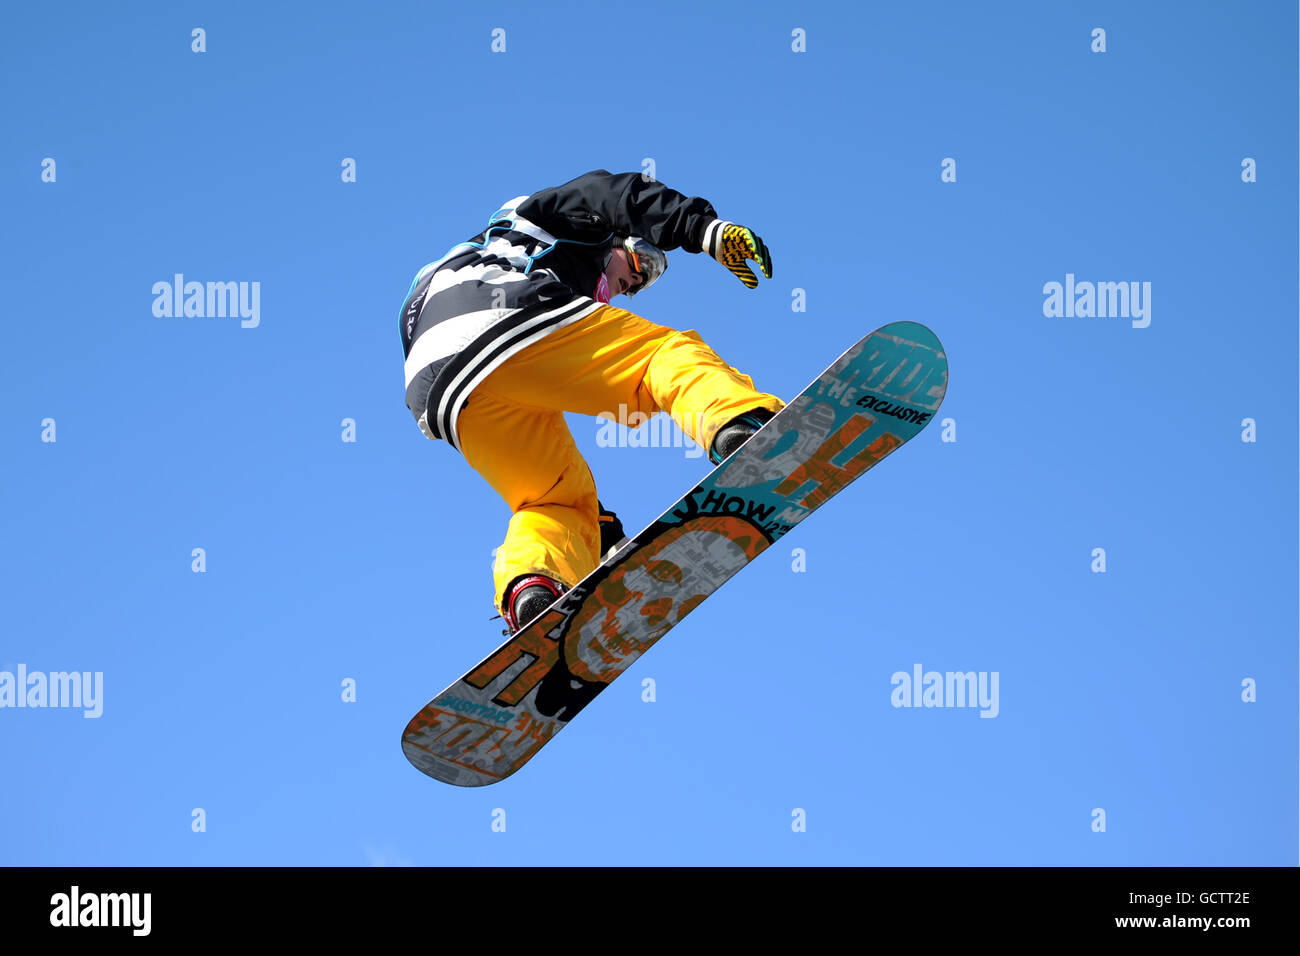 Sebastien Toutant of Canada during the LG Snowboard FIS World Cup in London Stock Photo